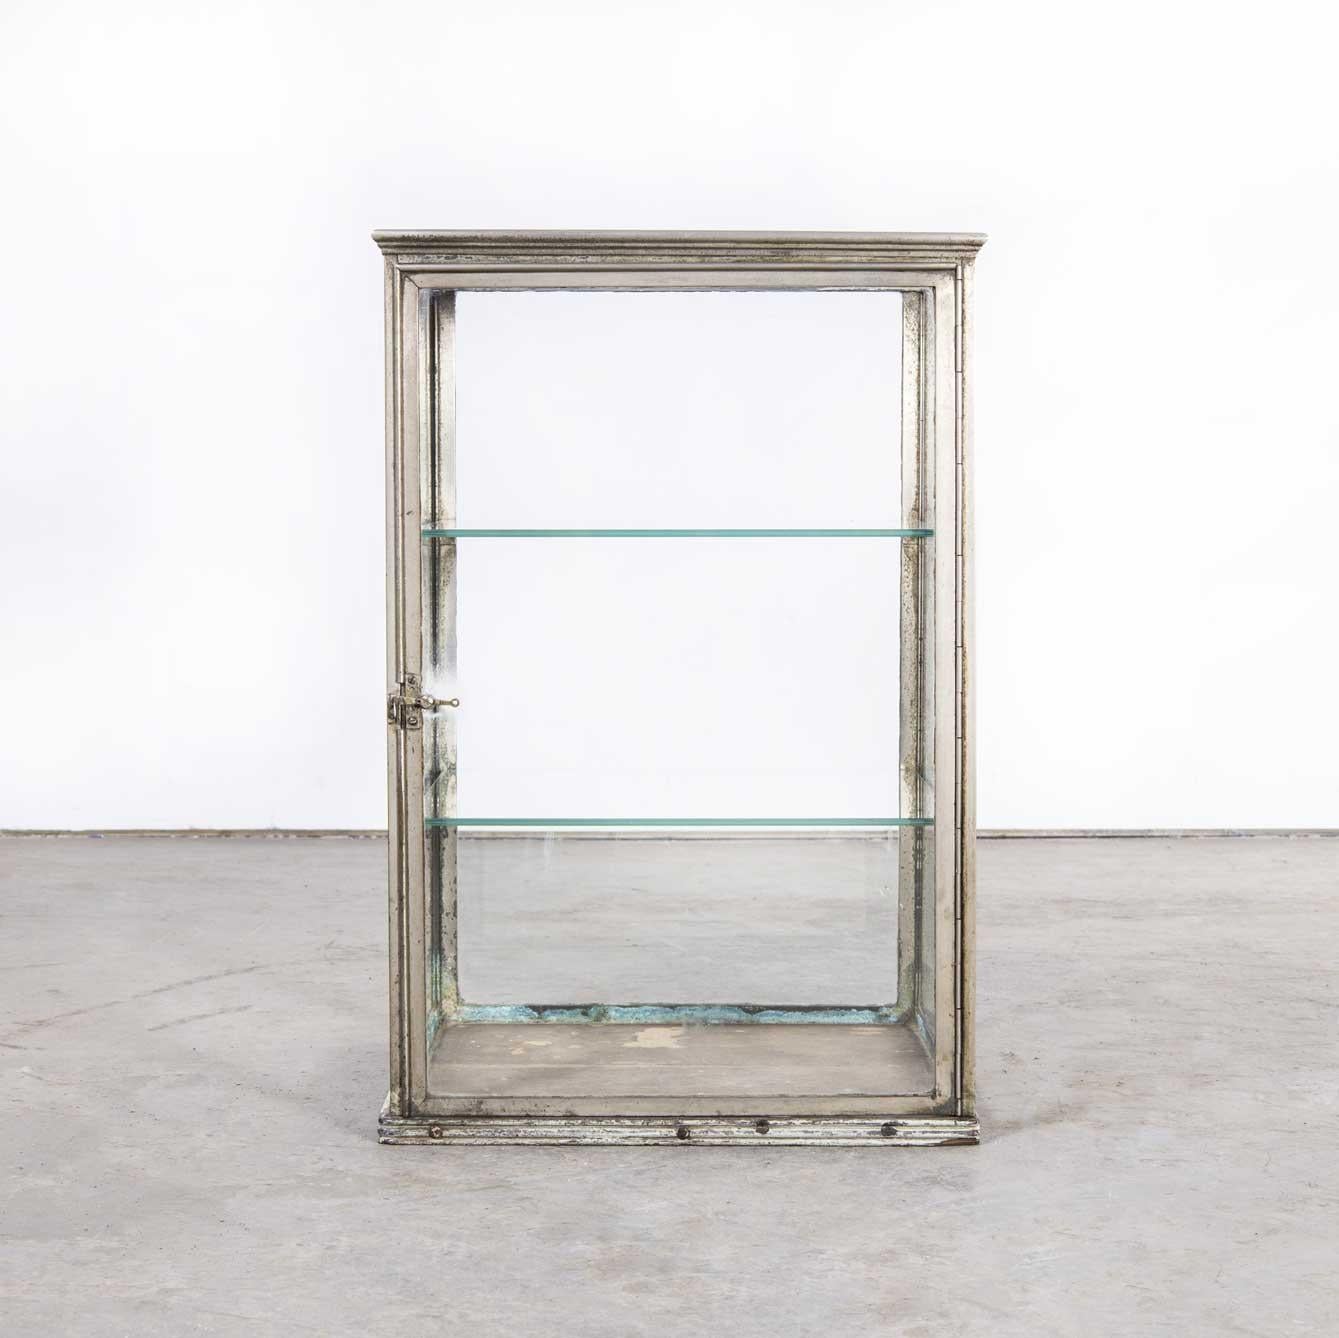 19th century French glass and chrome shelved shop display cabinet
19th century glass and chrome shelved shop display cabinet. Display cabinets of this size and originality with a dull chrome frame and original wood base are very hard to find.